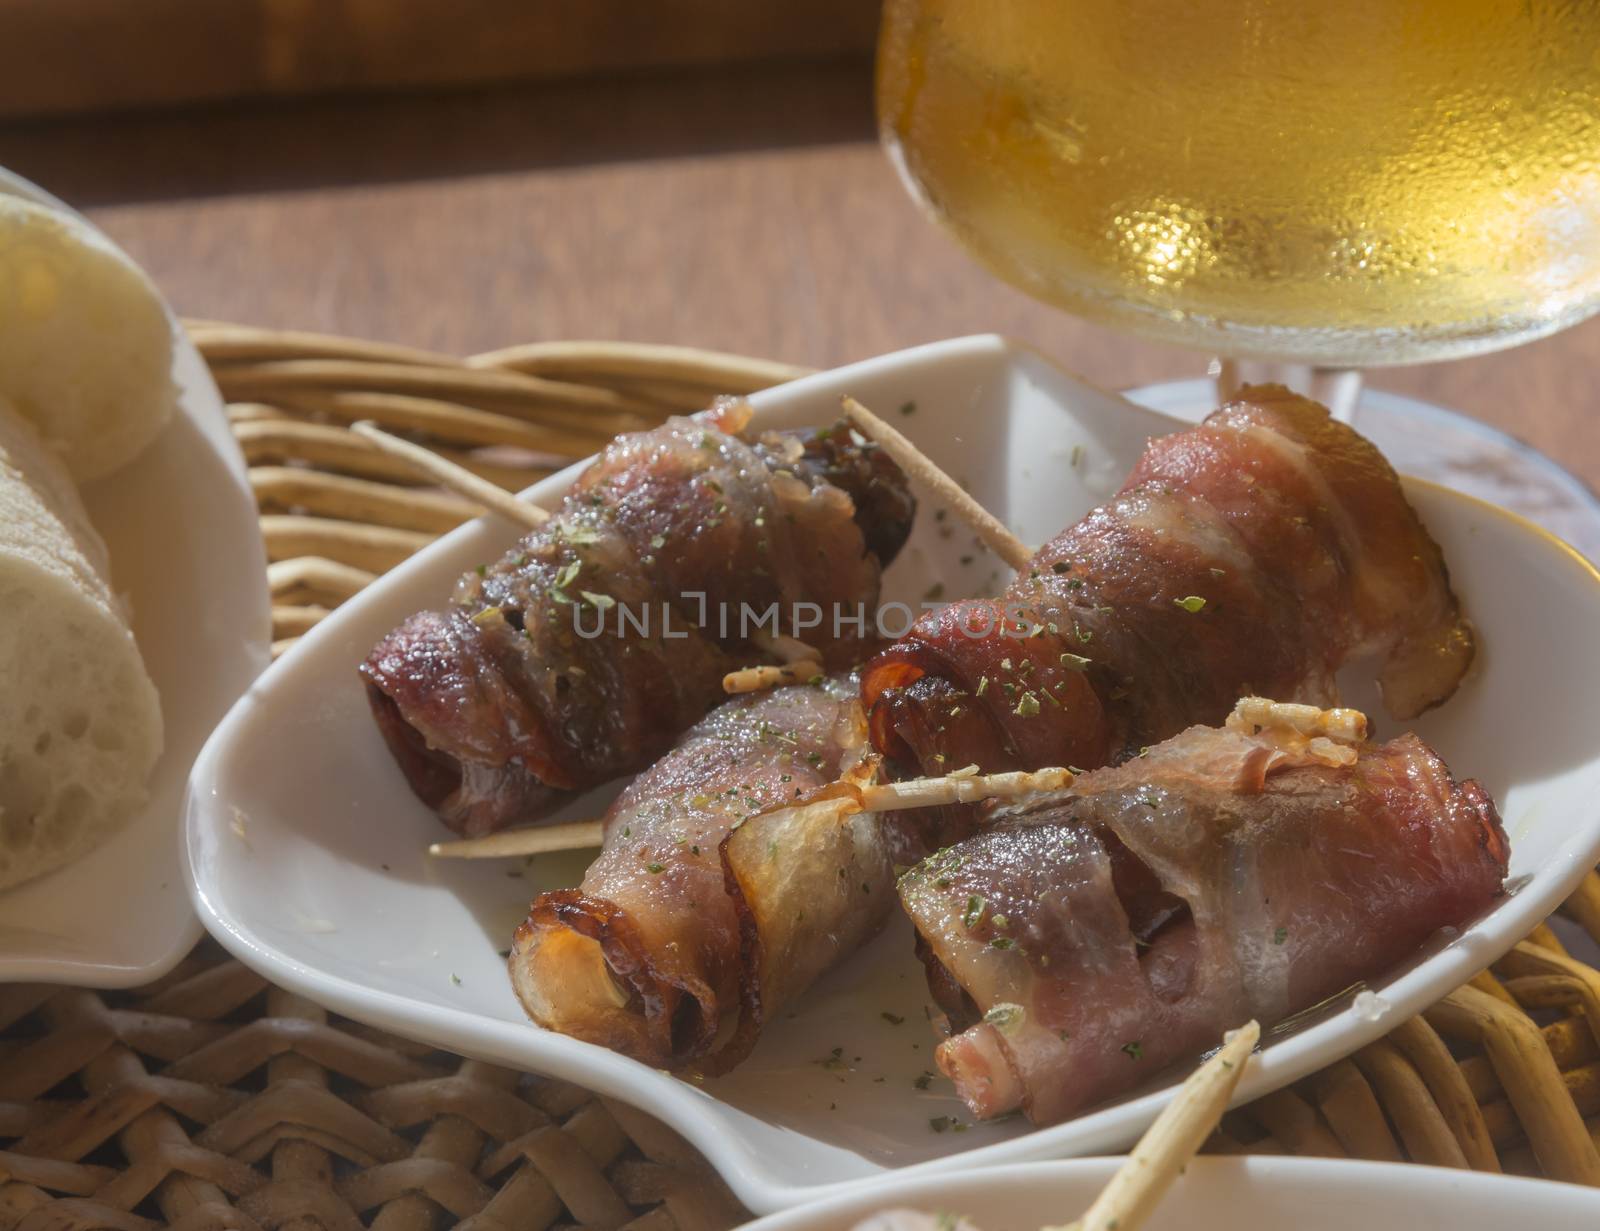 Bacon date tapas. Tapas with dates rolled in bacon and beer on a restaurant table. Mallorca, Balearic islands, Spain.